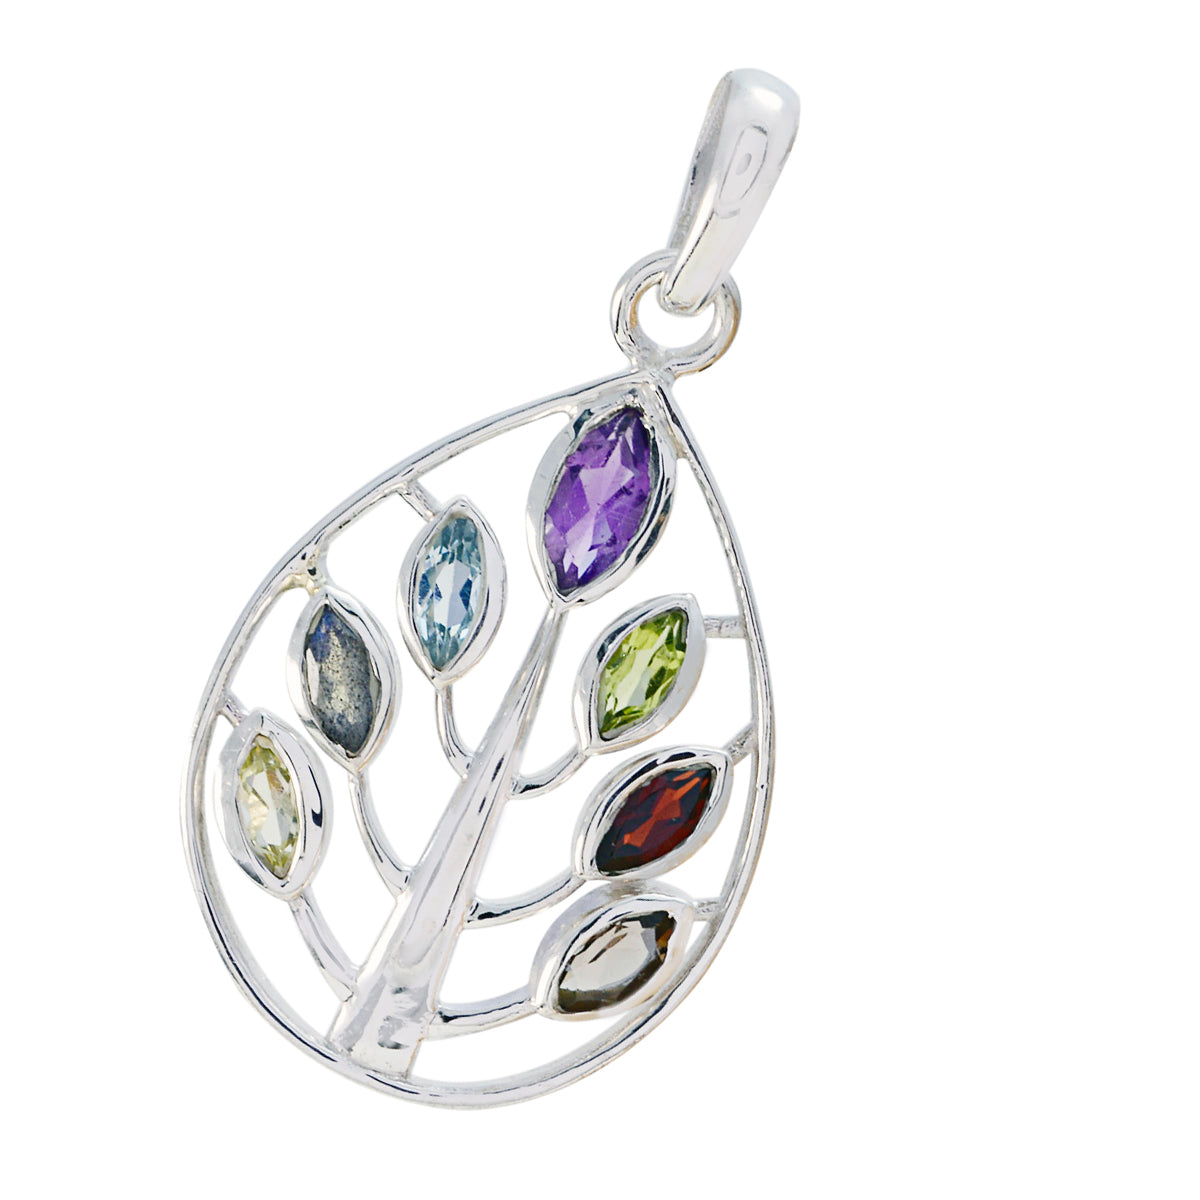 Riyo Tasty Gemstone Marquise Faceted Multi Color Multi Stone 1062 Sterling Silver Pendant Gift For Good Friday